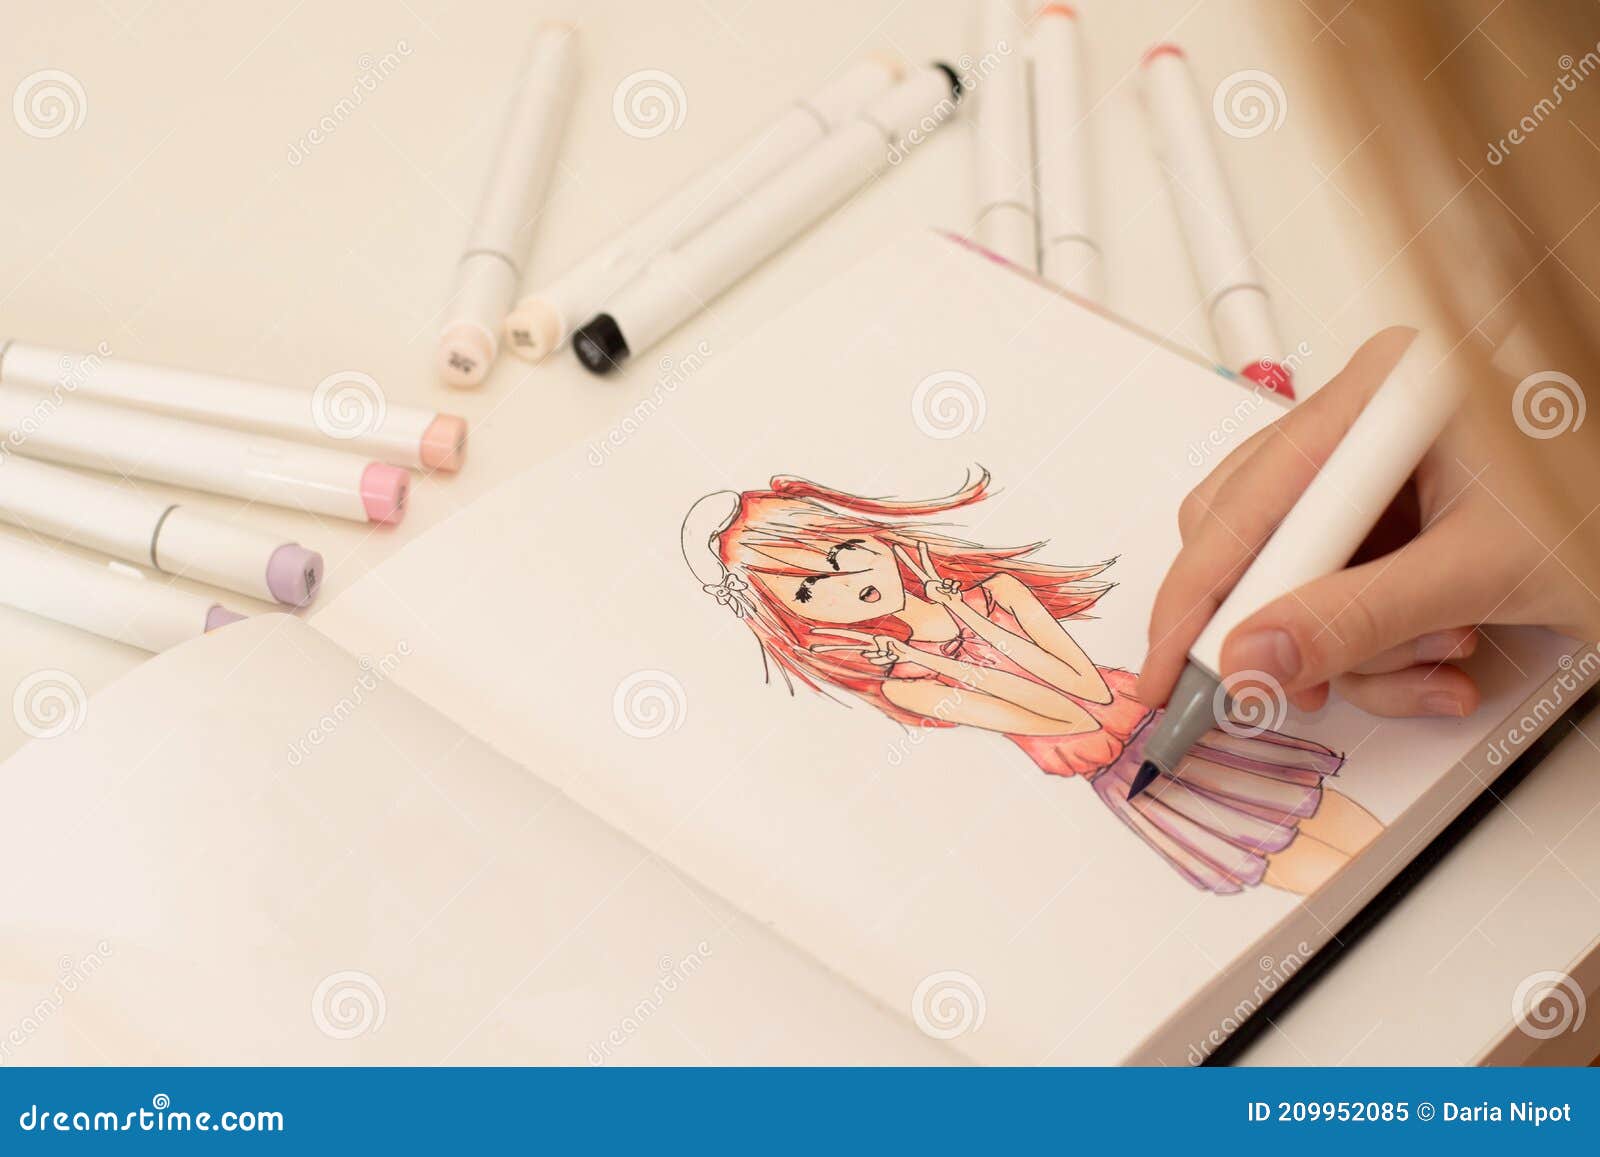 Hand Drawing a Cute Girl Anime Style Sketch with Alcohol Based Sketch Drawing  Markers Stock Image - Image of markers, hand: 209952085